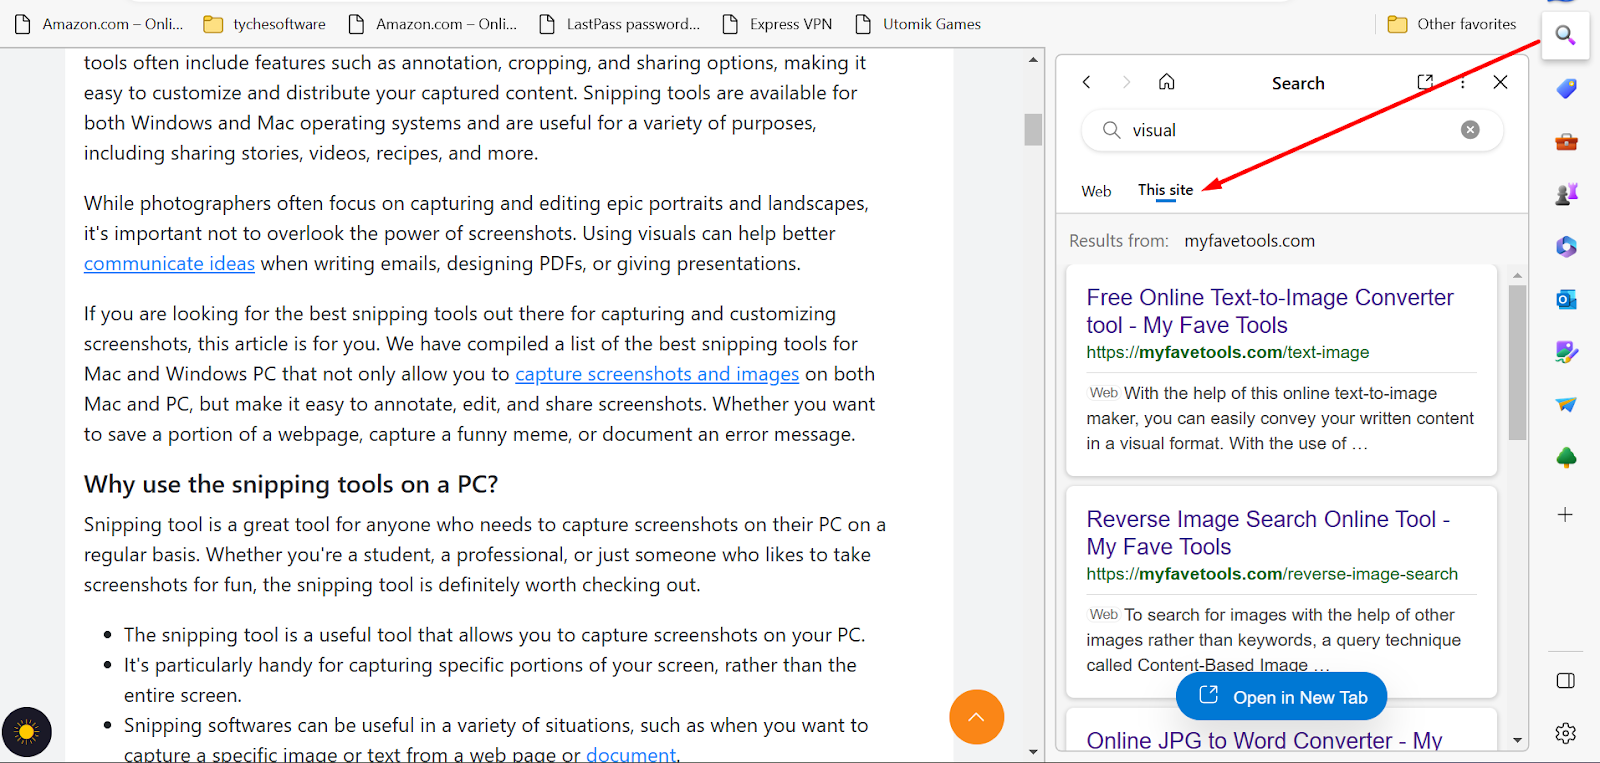 How to search a word on a website while browsing on Microsoft Edge